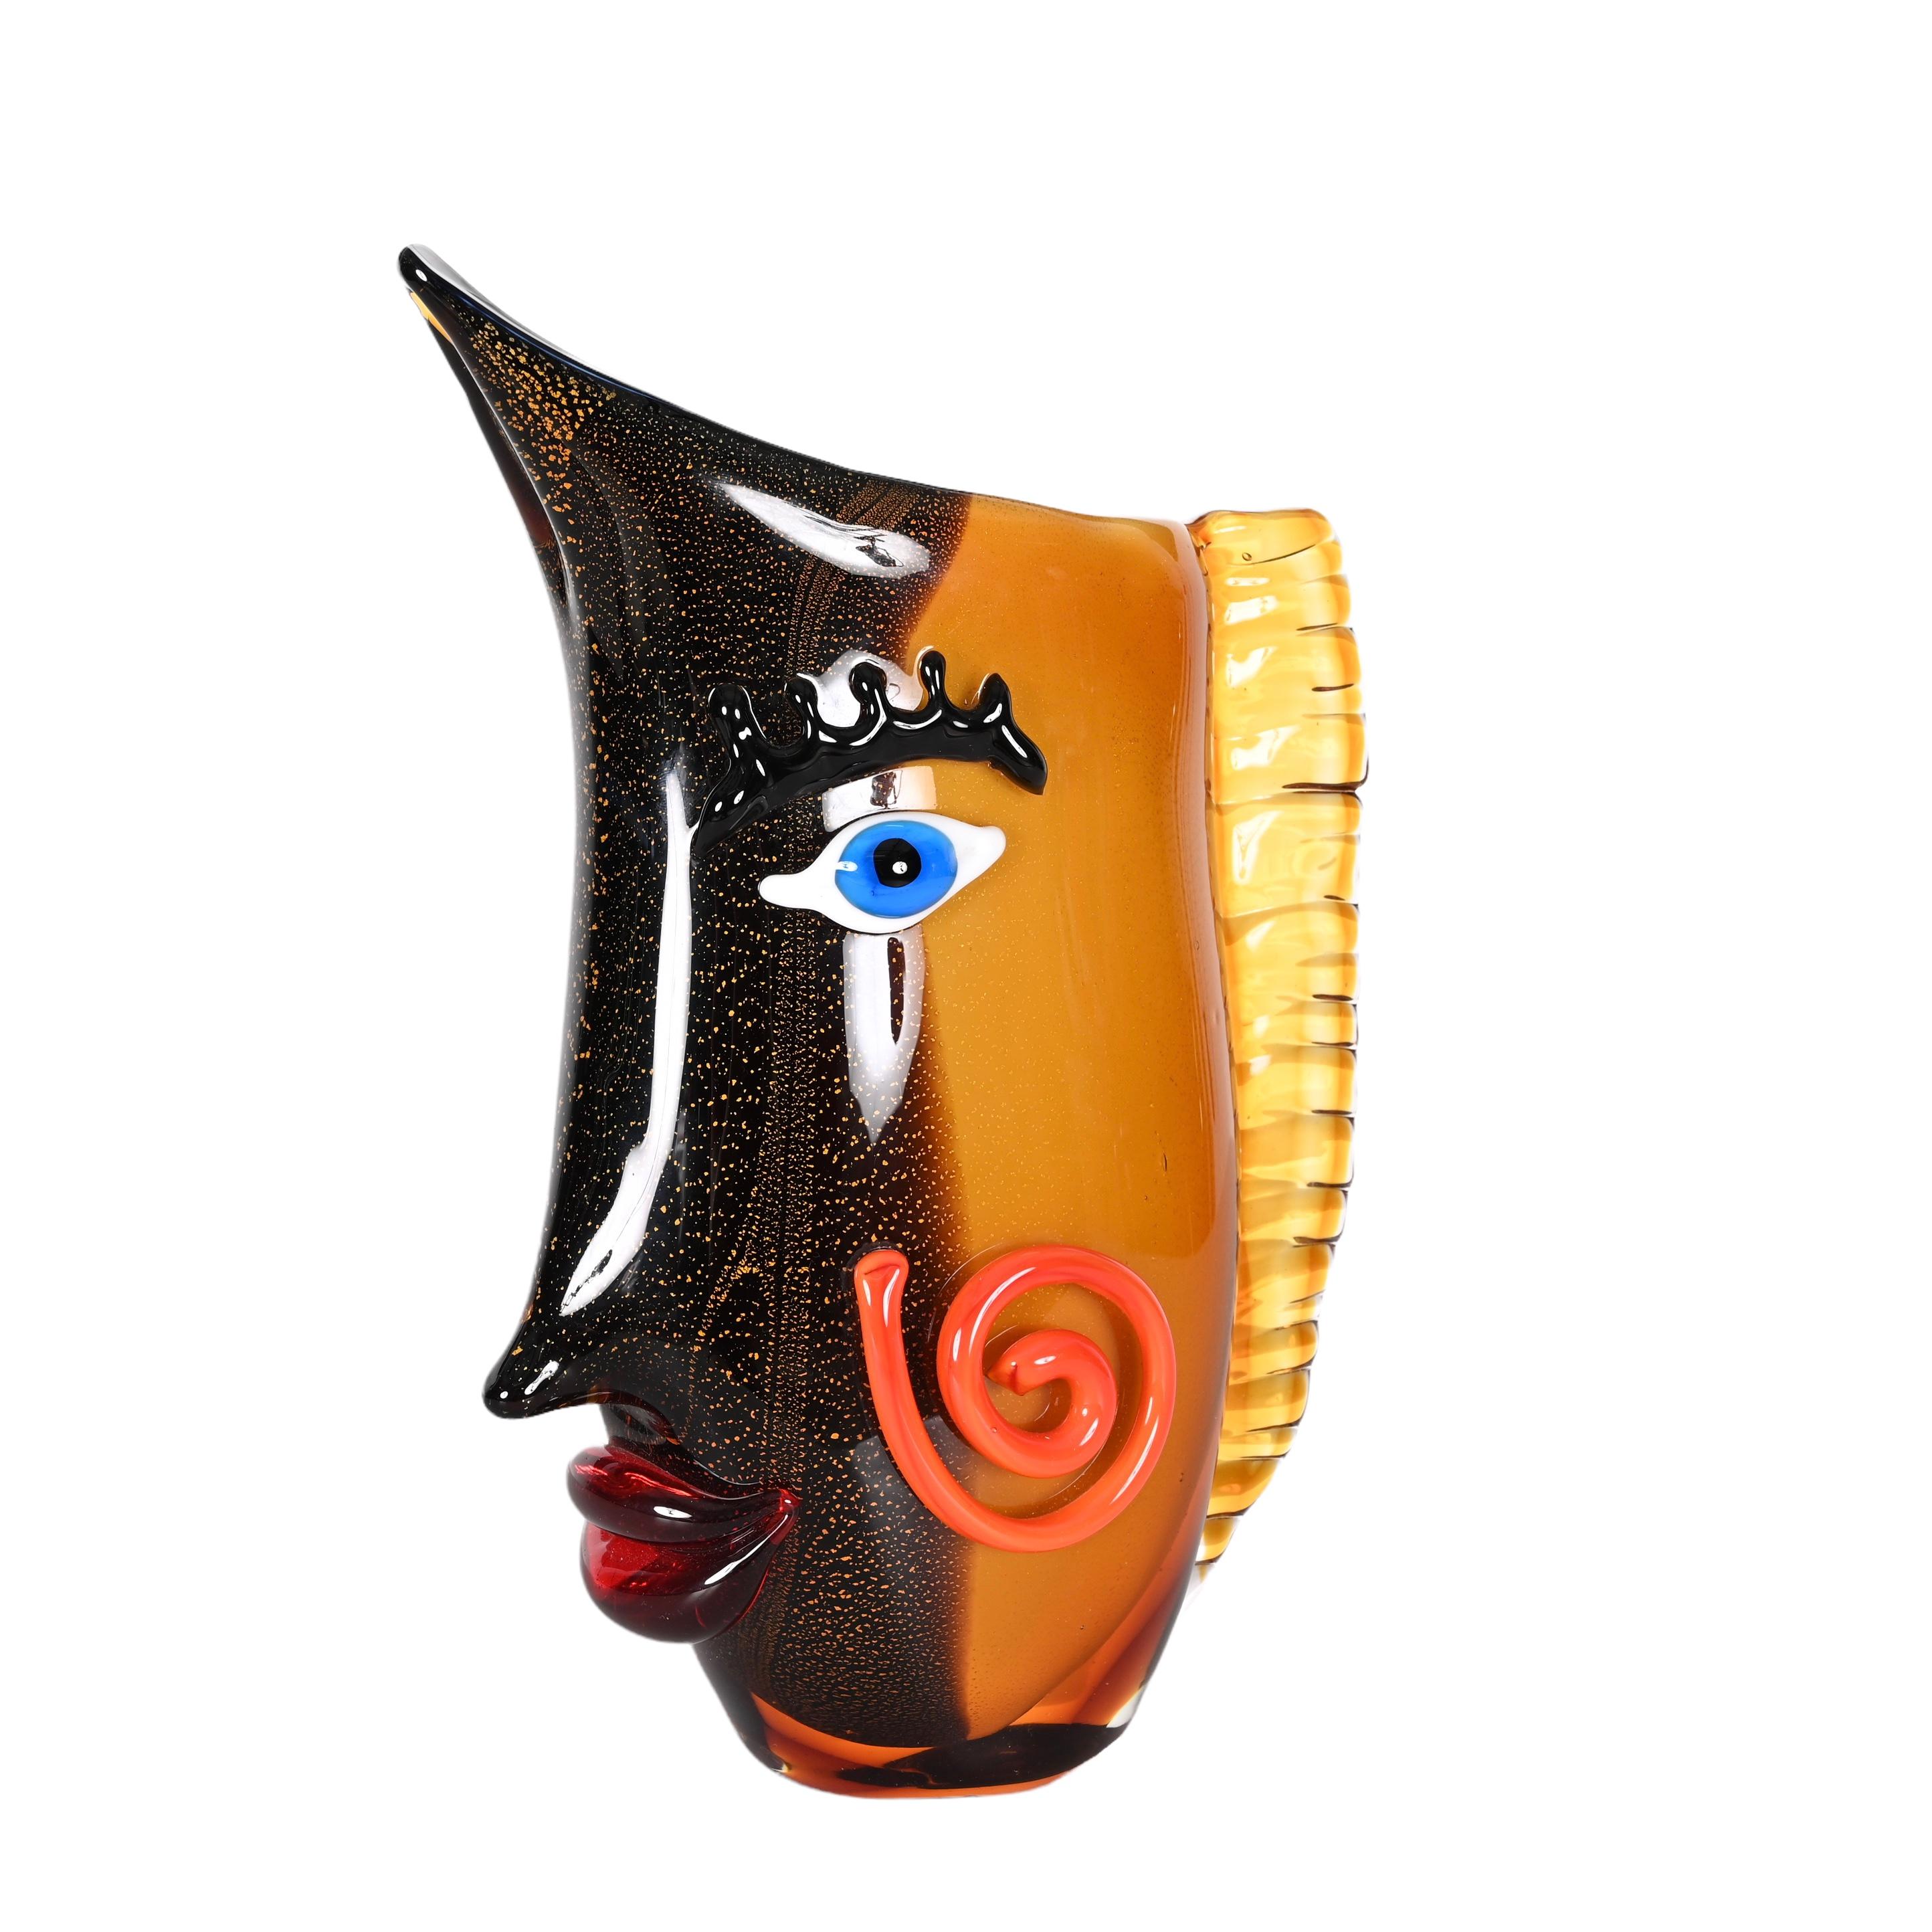 Mario Badioli after Picasso Black and Orange Sommerso Murano Glass Vase, 1980s For Sale 5